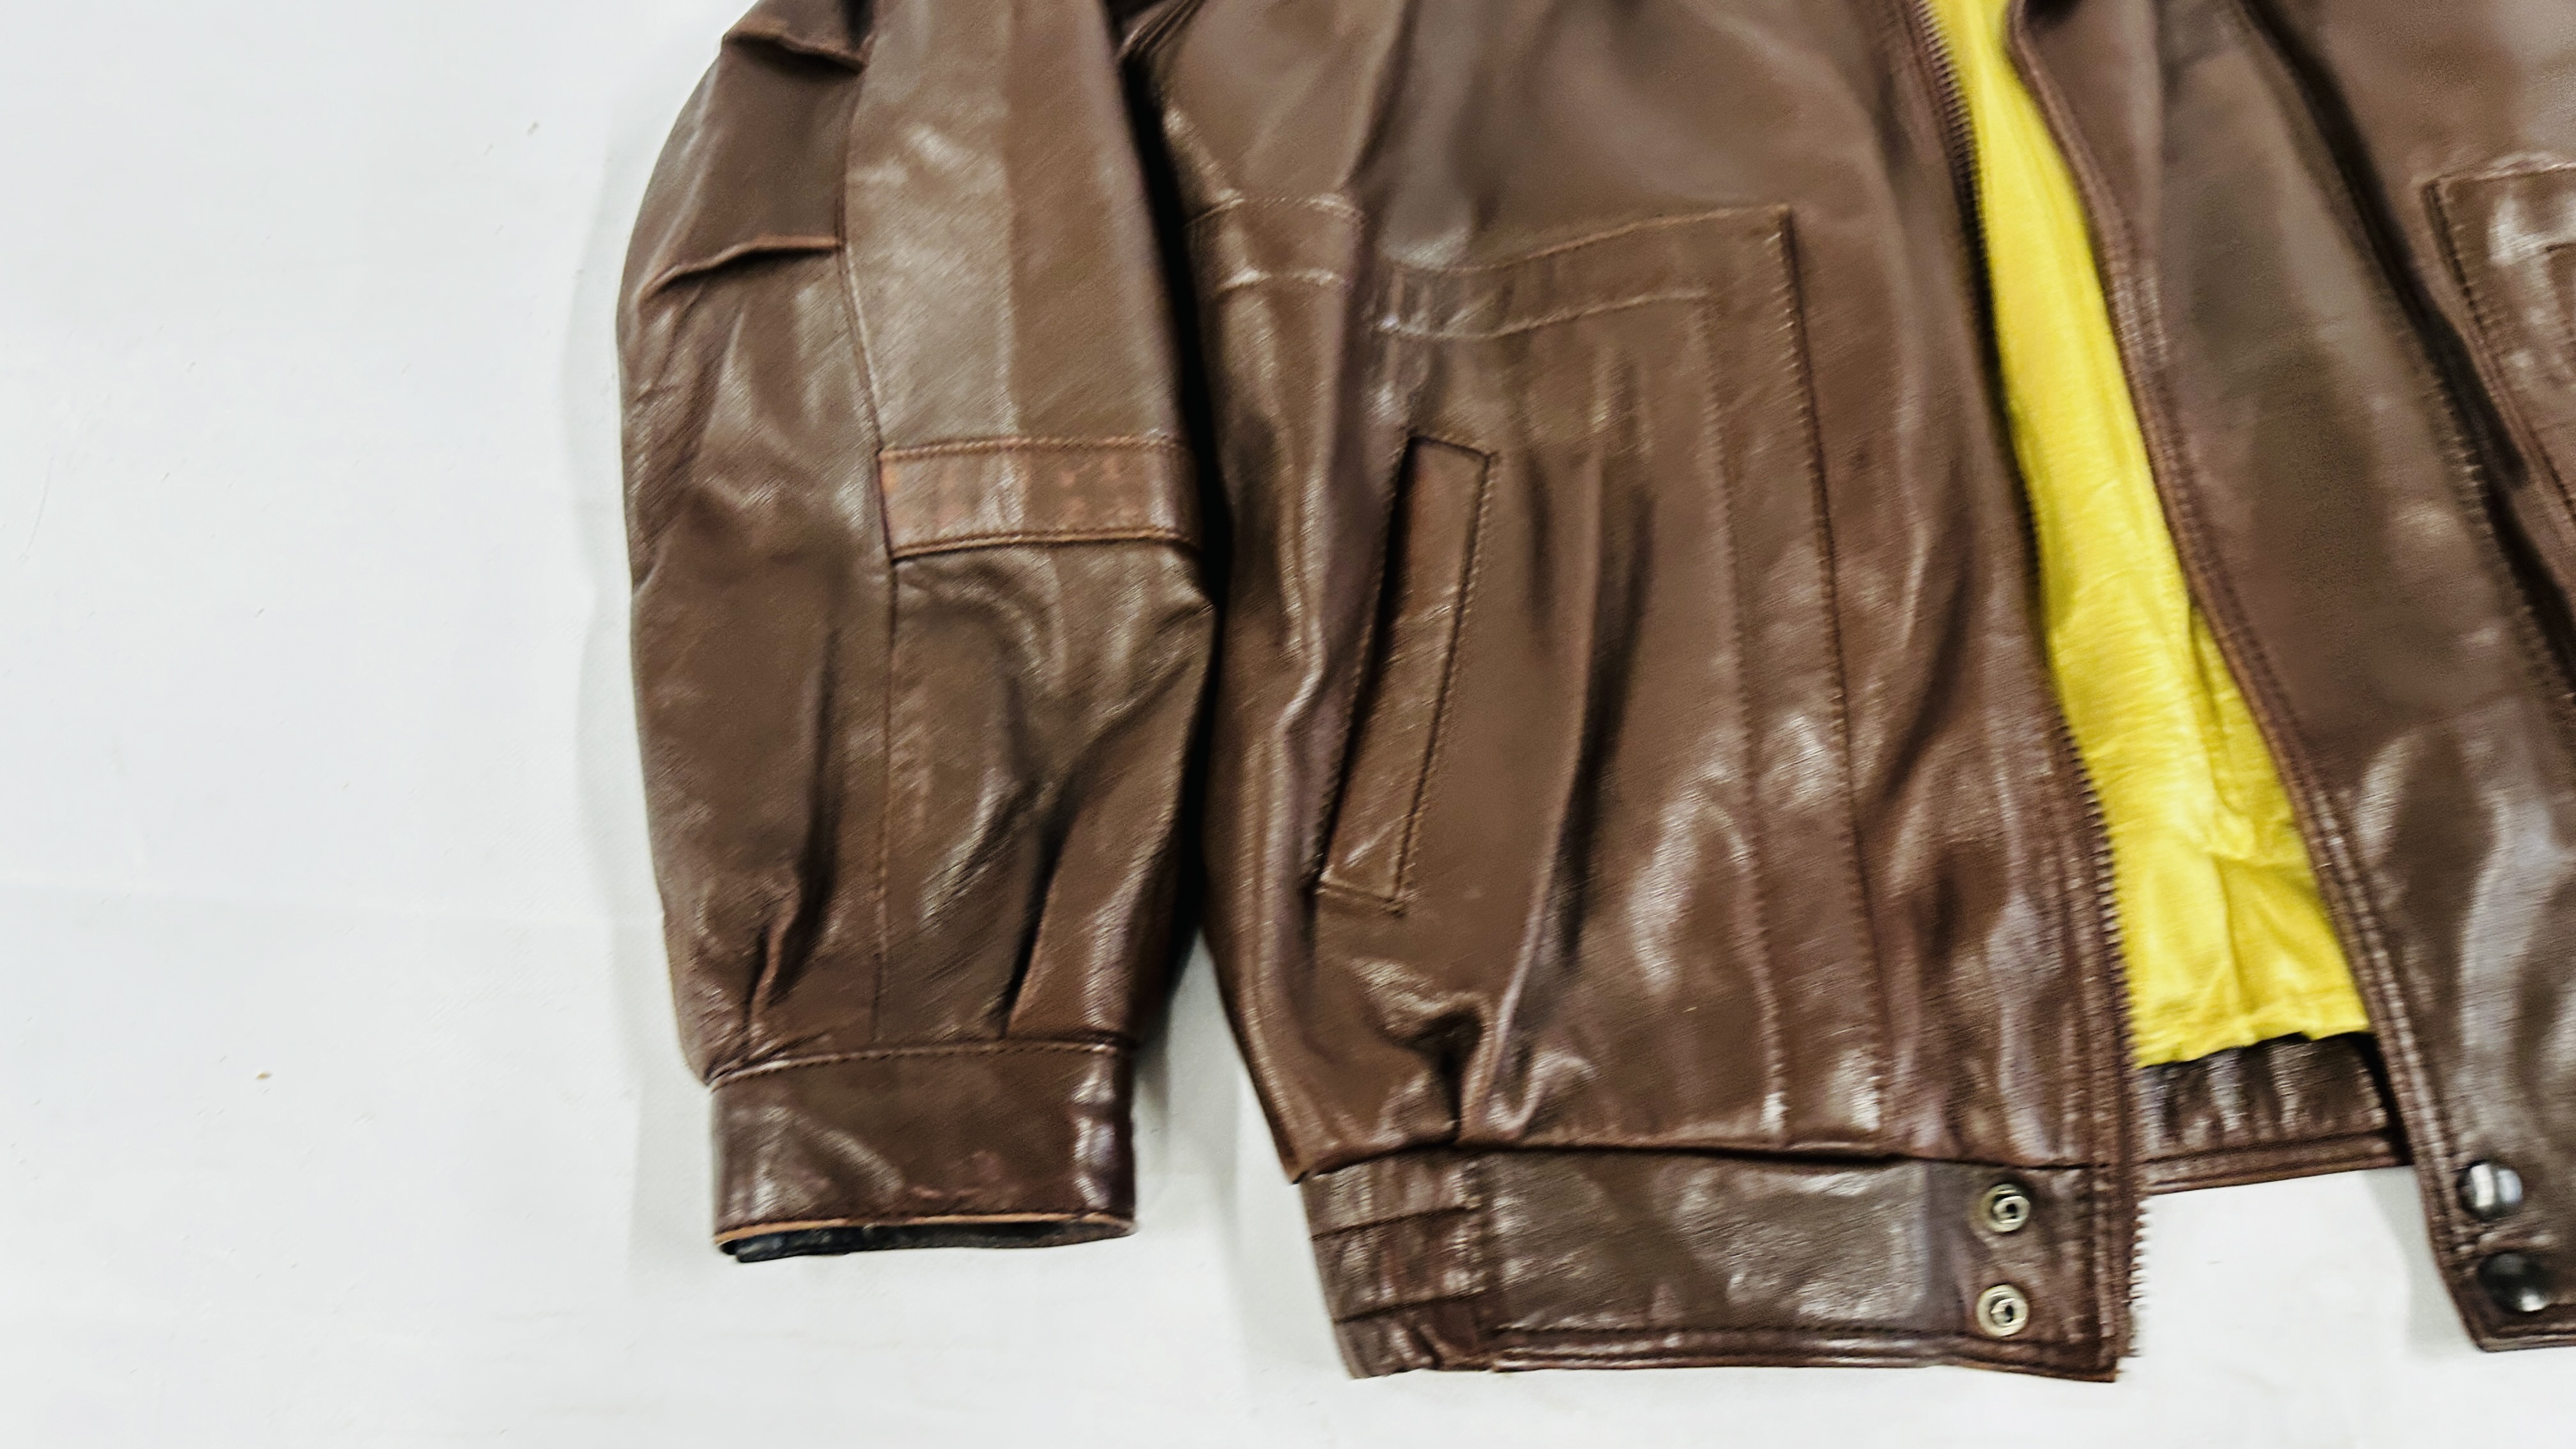 A GENTS BROWN LEATHER JACKET MARKED "SARDAR" SIZE L. - Image 5 of 9